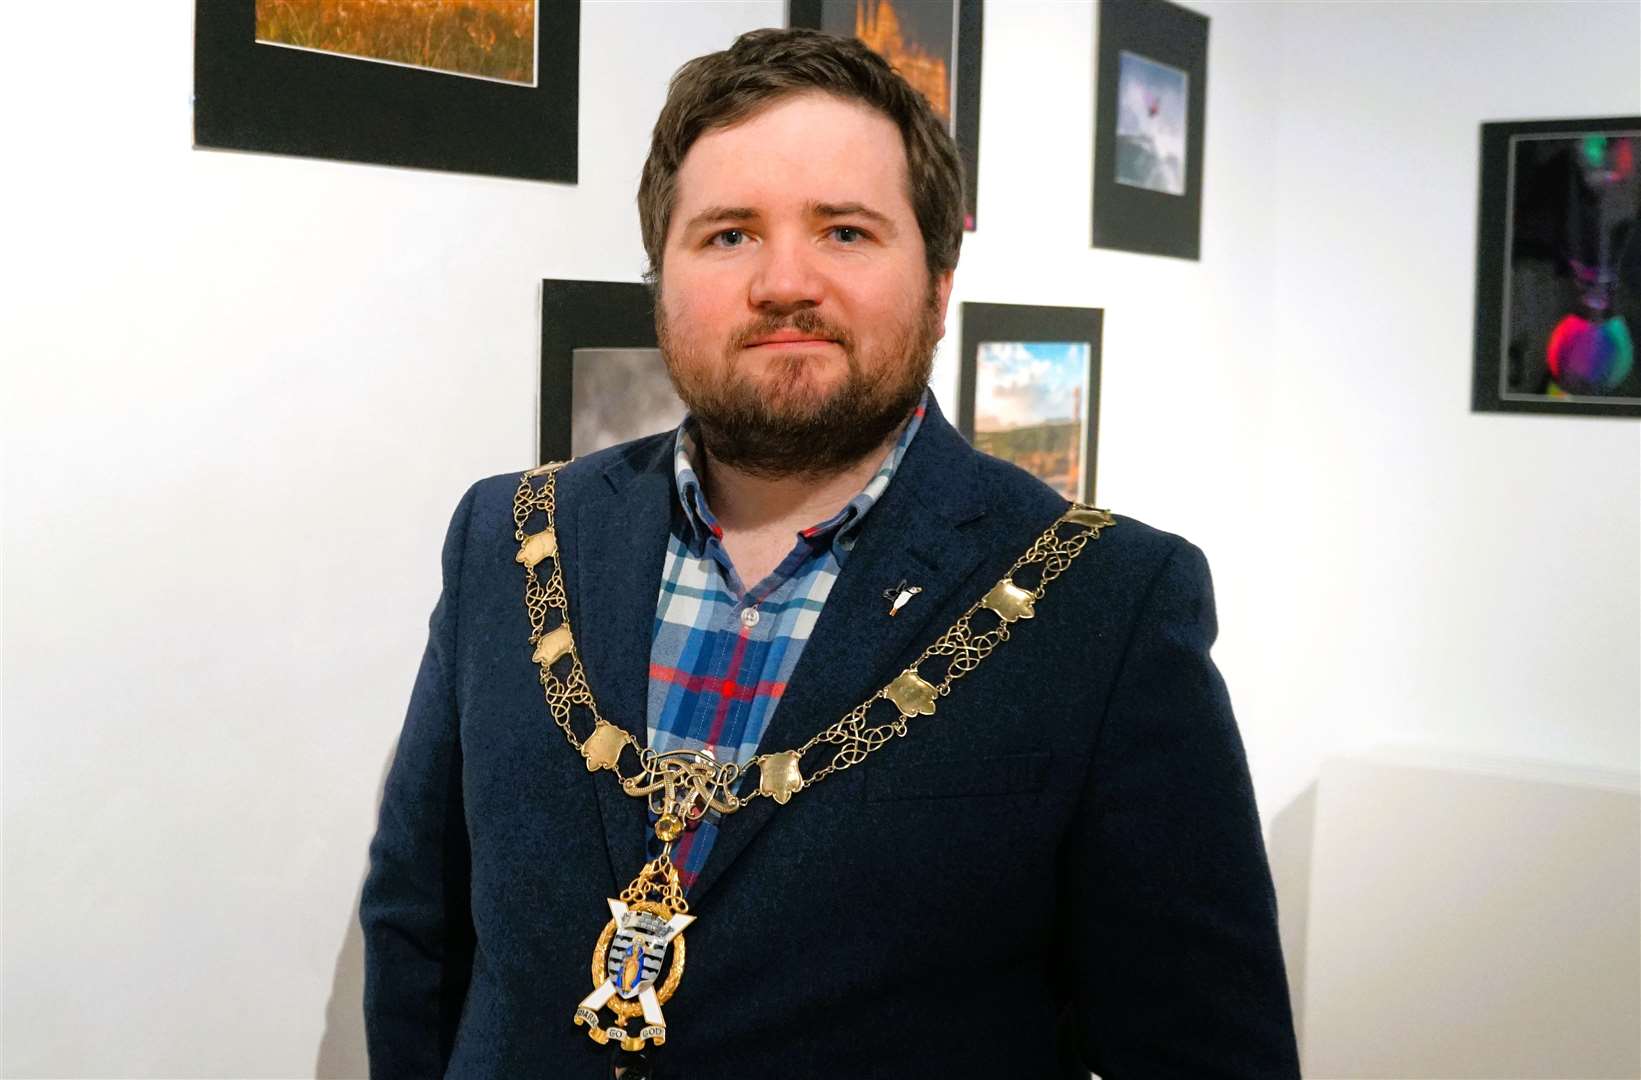 Thurso provost Struan Mackie was delighted with the show of talent at the photographic exhibition at Thurso Art Gallery. Picture: DGS